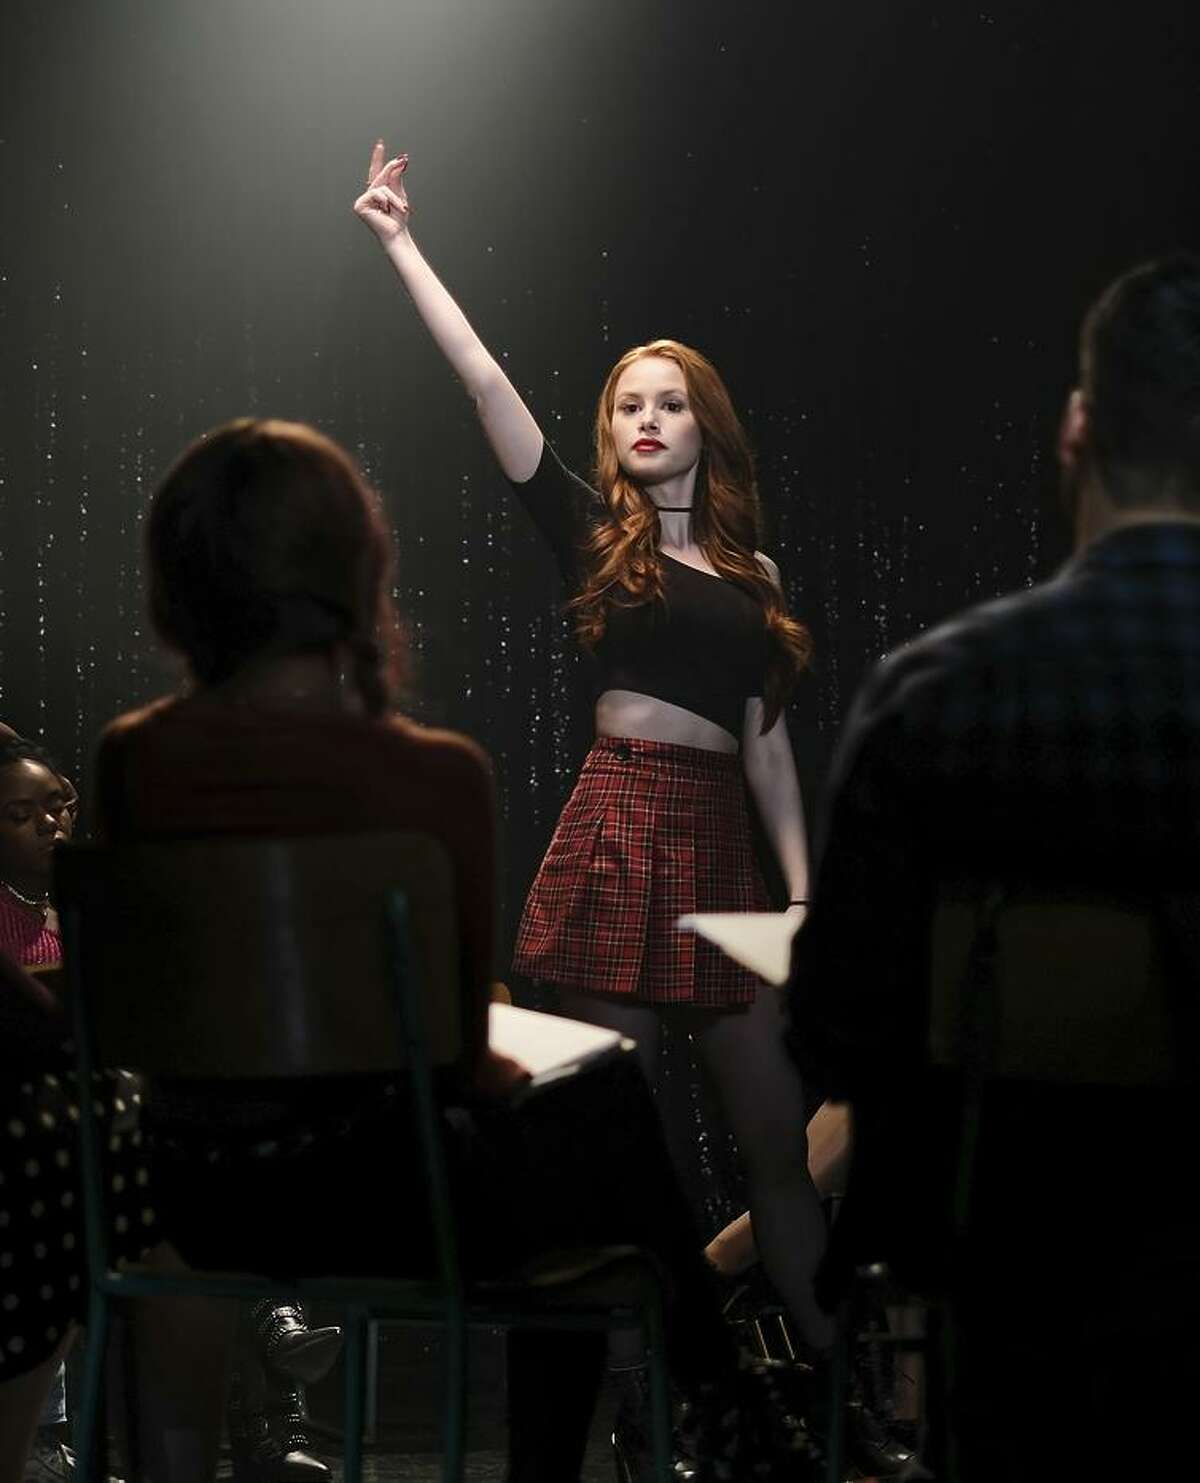 Madelaine Petsch as Cheryl in “Riverdale,” which has a musical episode Wednesday, April 18.